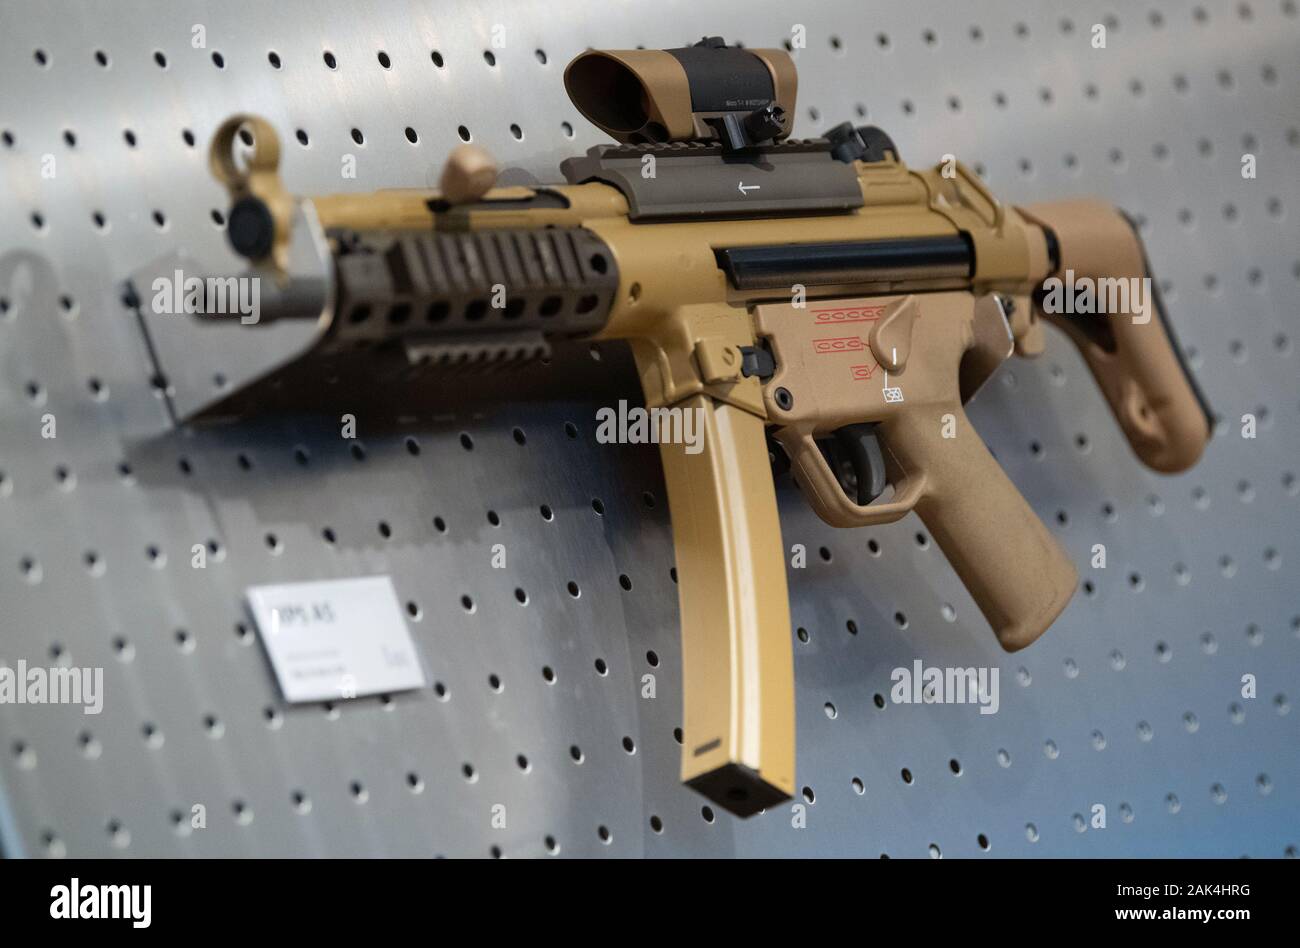 Heckler & Koch Mp5 High Resolution Stock Photography and Images - Alamy